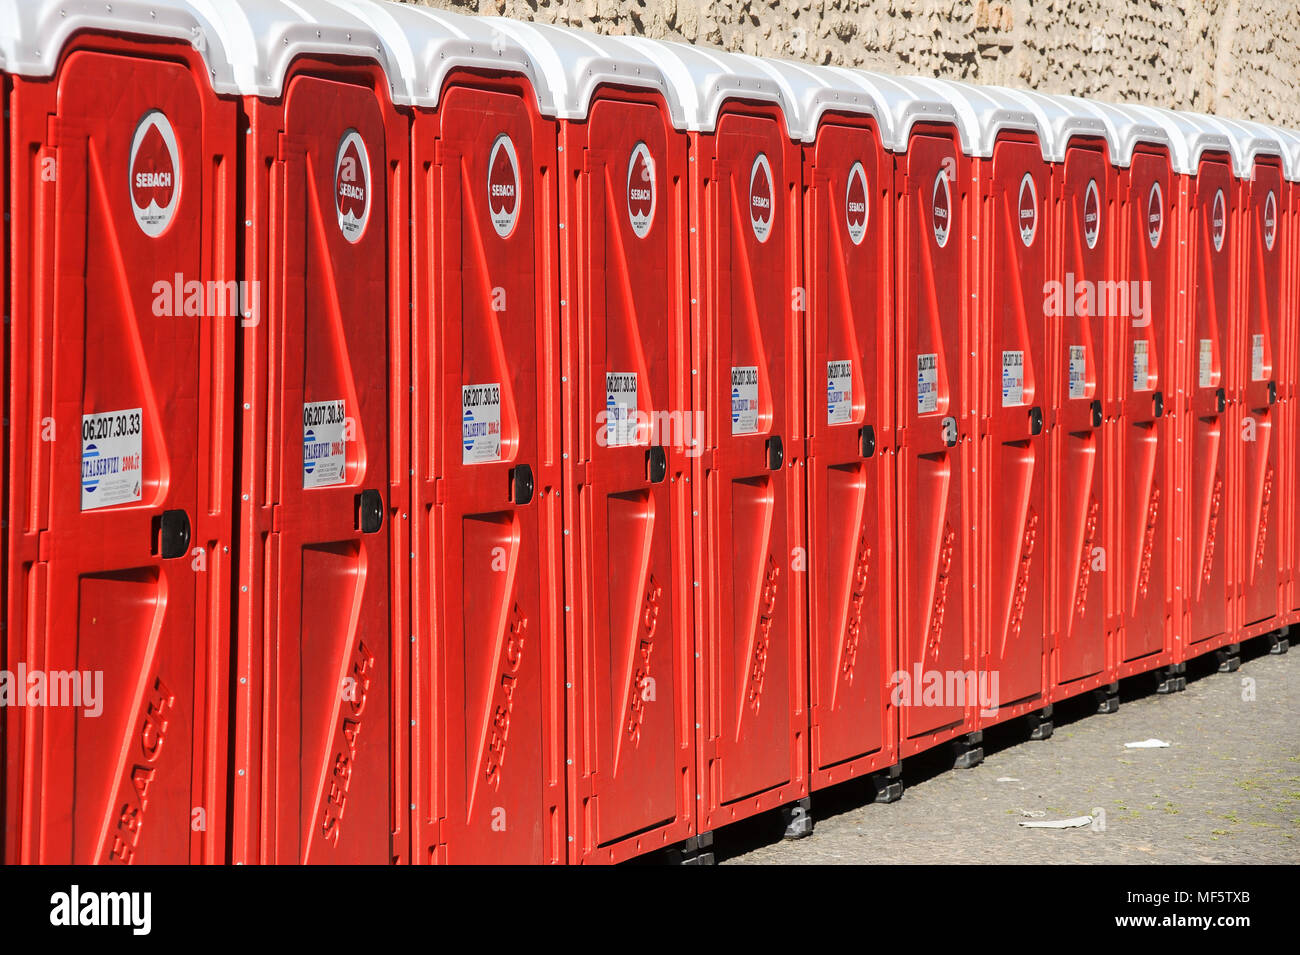 Long row of chemical toilets in Rome, Italy. May 1st 2011 © Wojciech Strozyk / Alamy Stock Photo Stock Photo